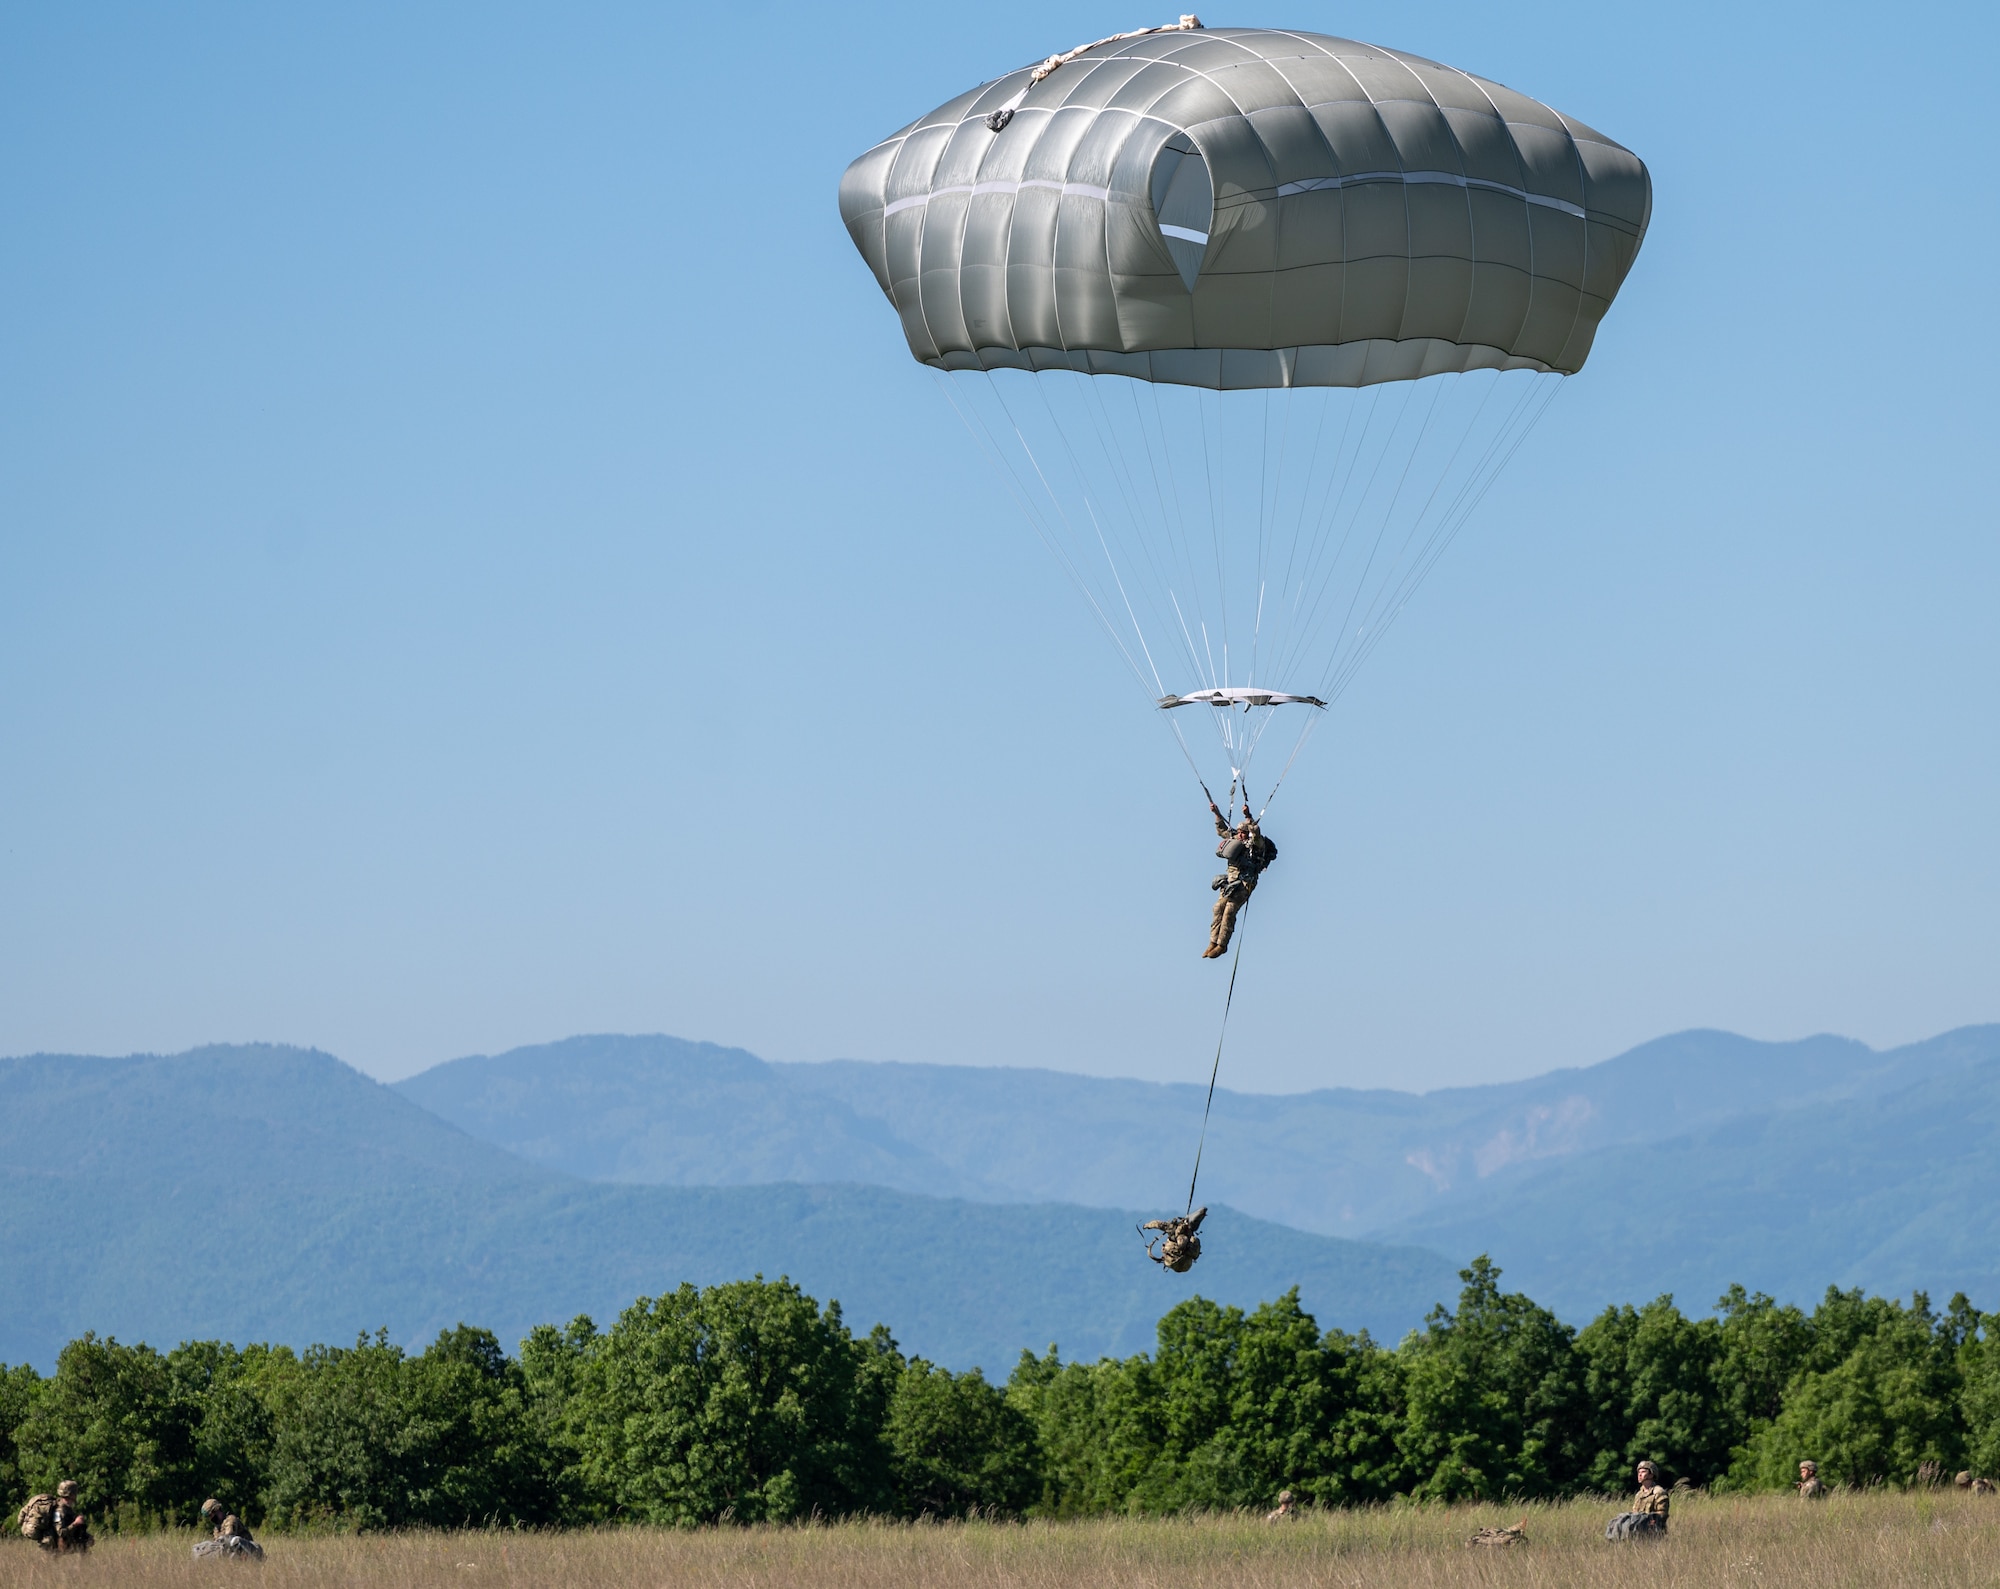 A paratrooper approaching the ground.